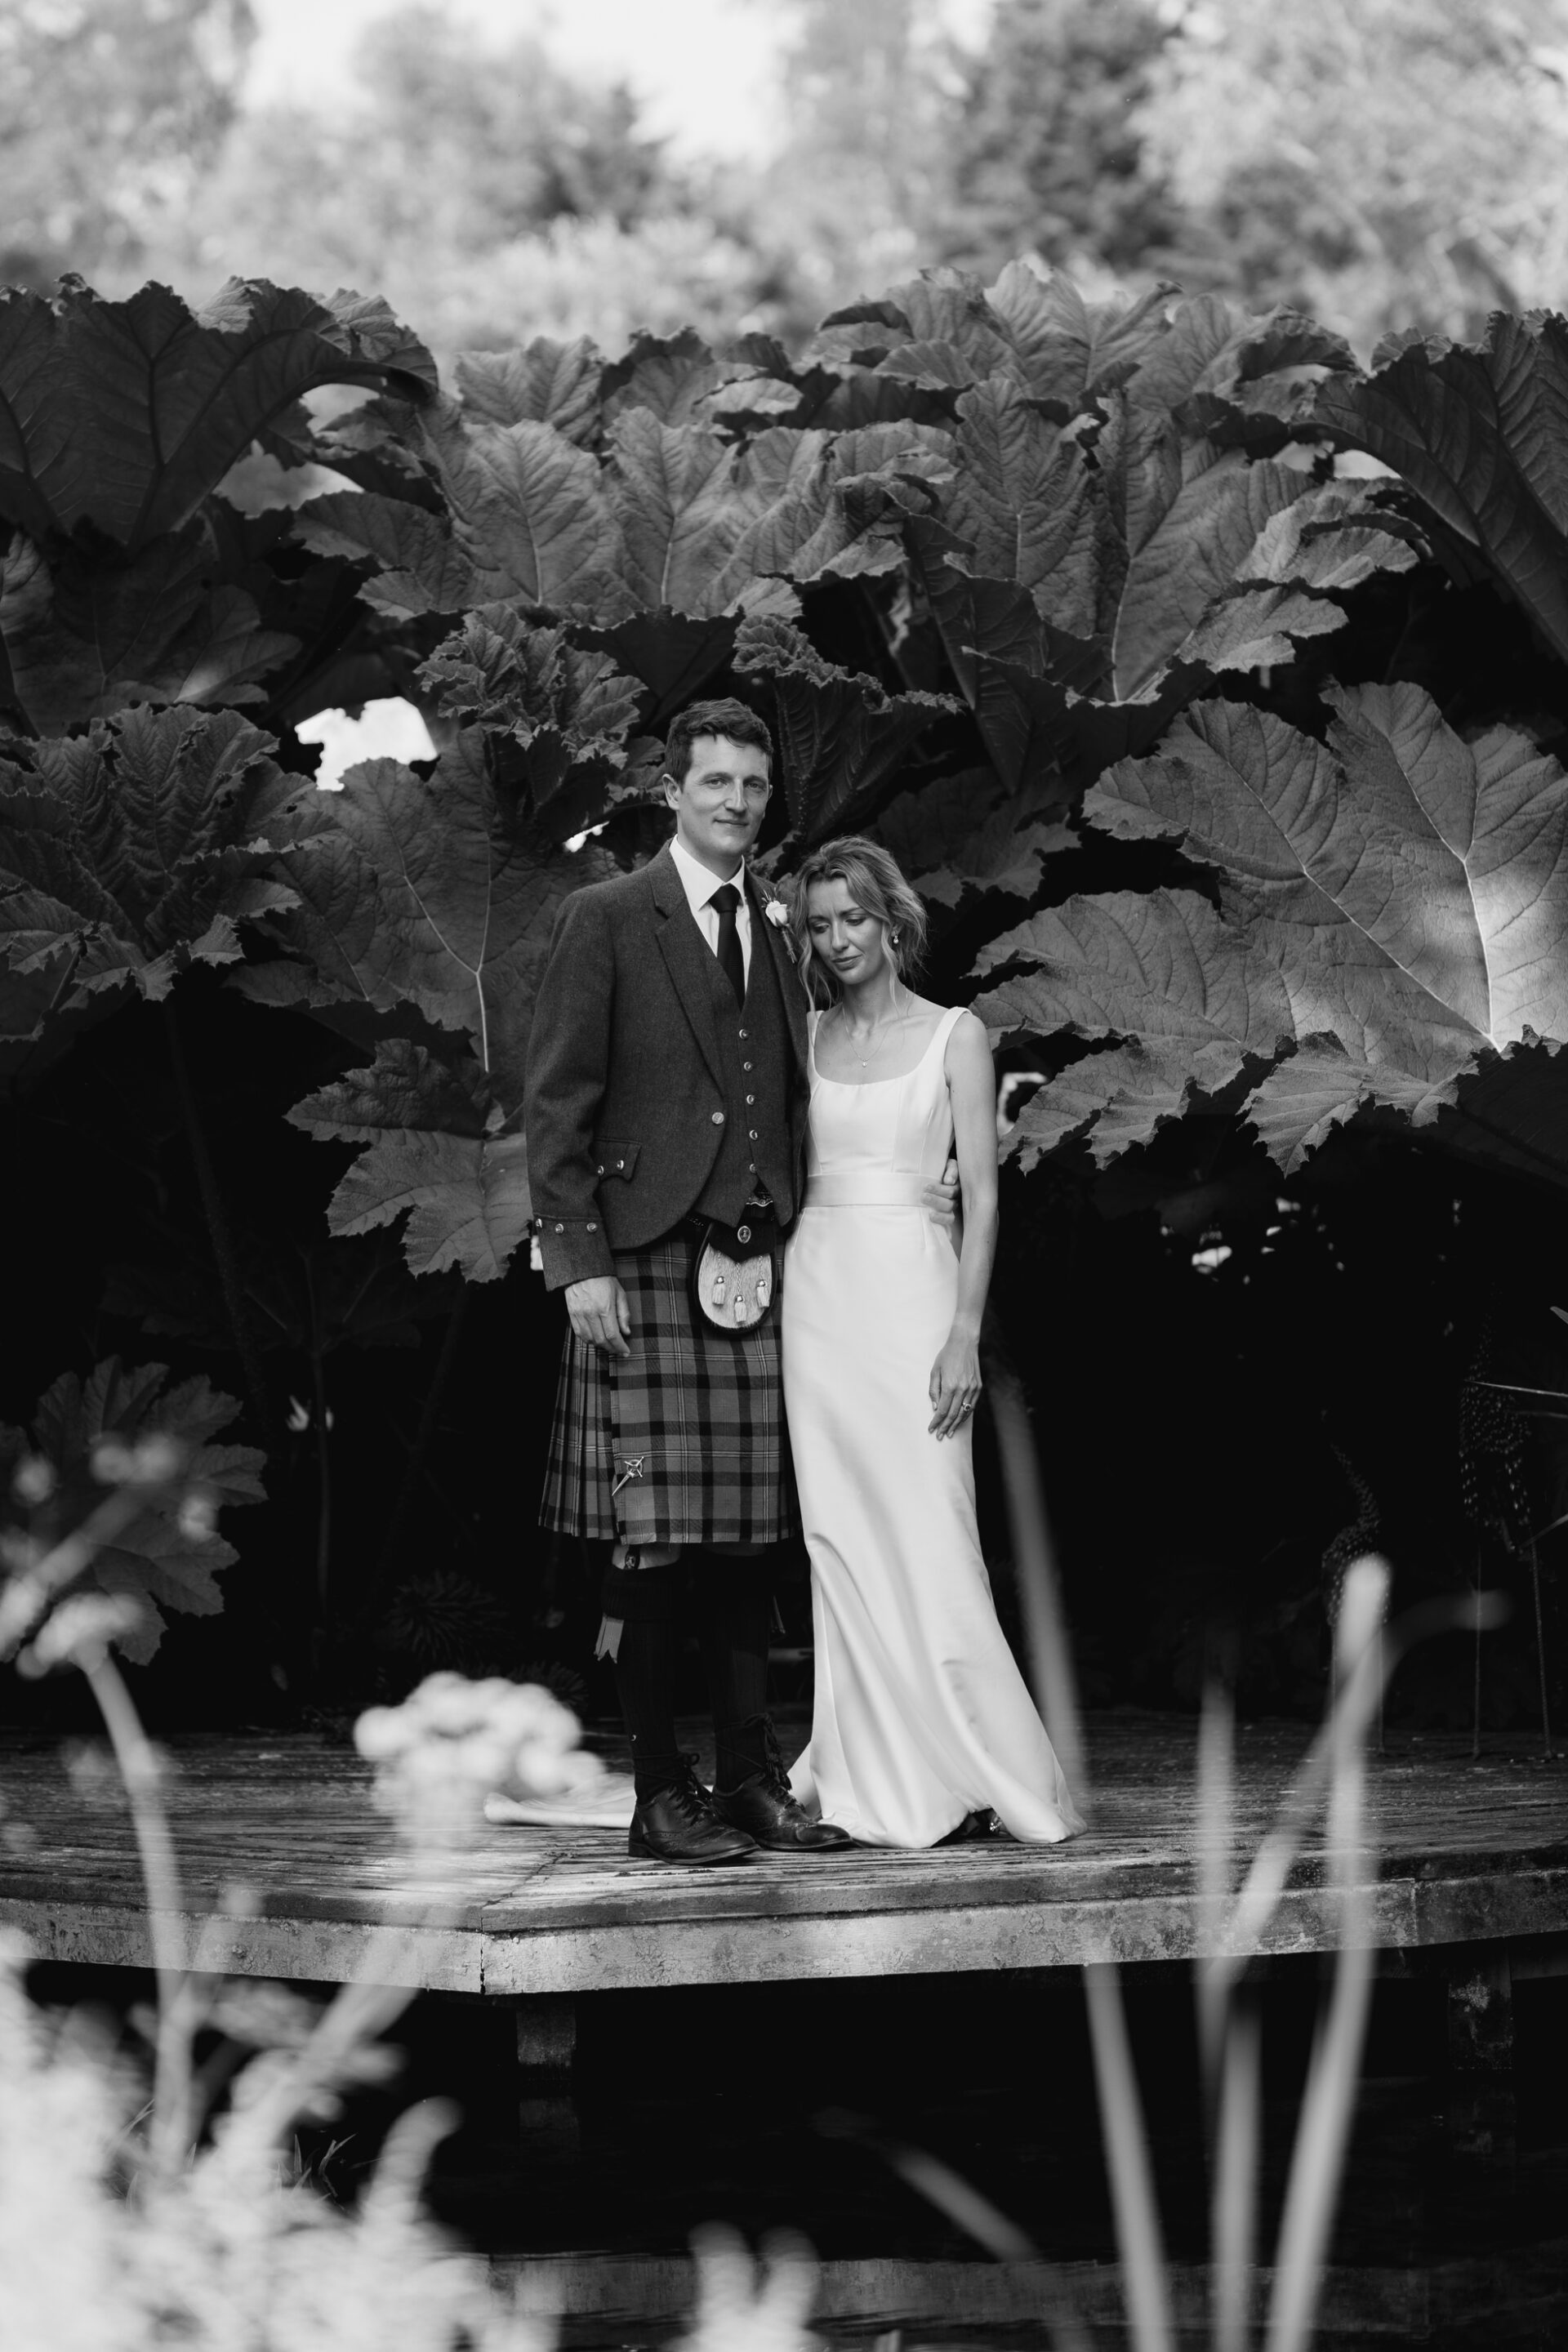 The bride and groom are framed by giant leaves during their couples portrait session